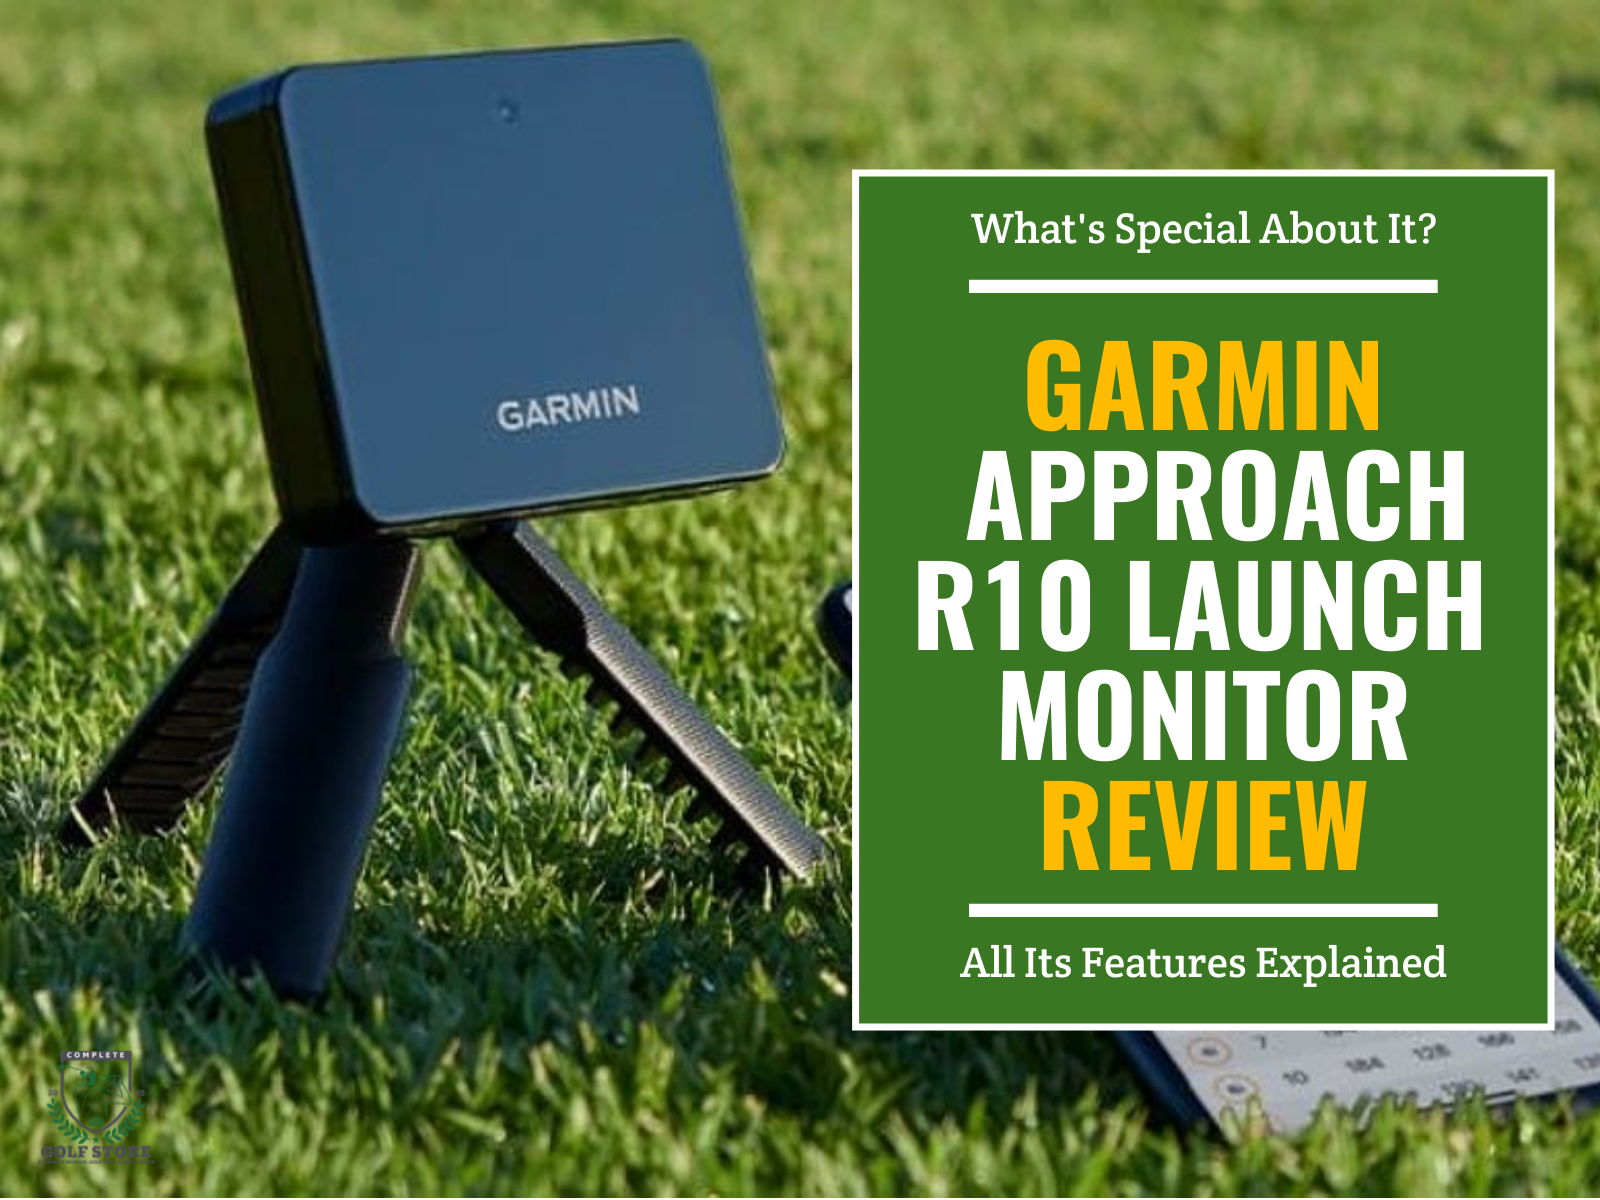 Garmin Approach R10 Launch Monitor on top of grass with smartphone beside it. Green textbox on the right contains the text 